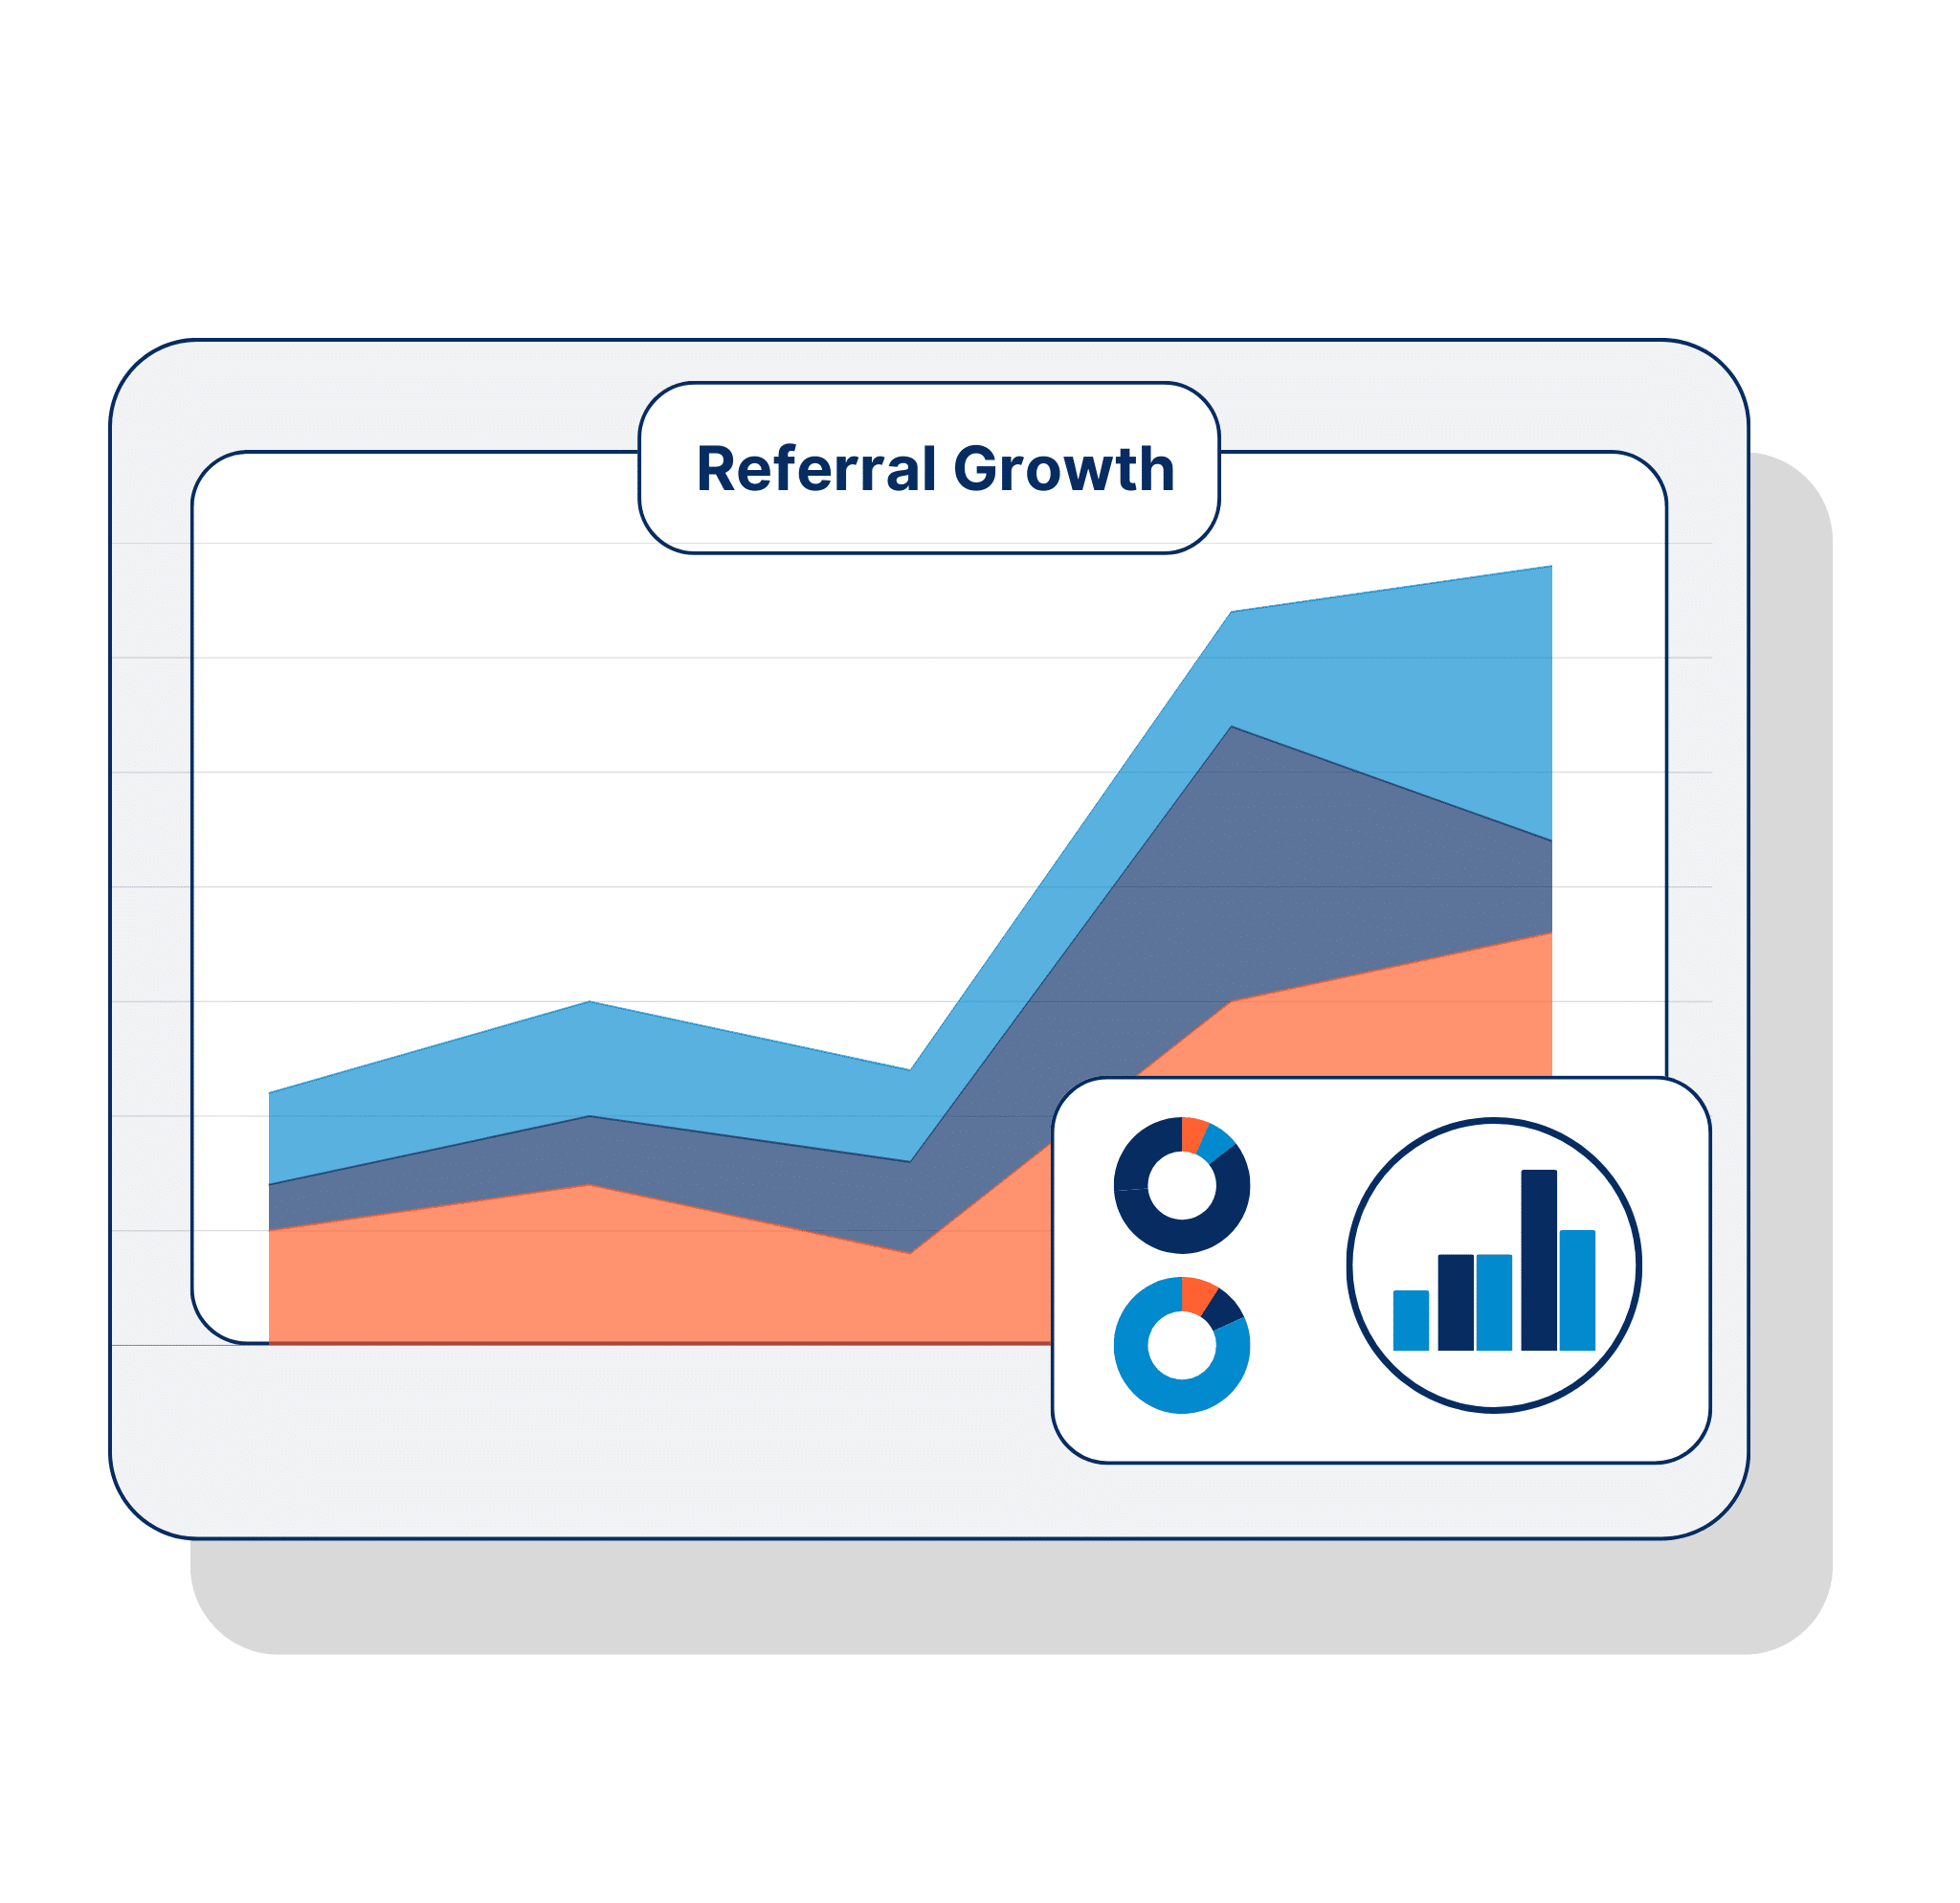 Referral growth chart